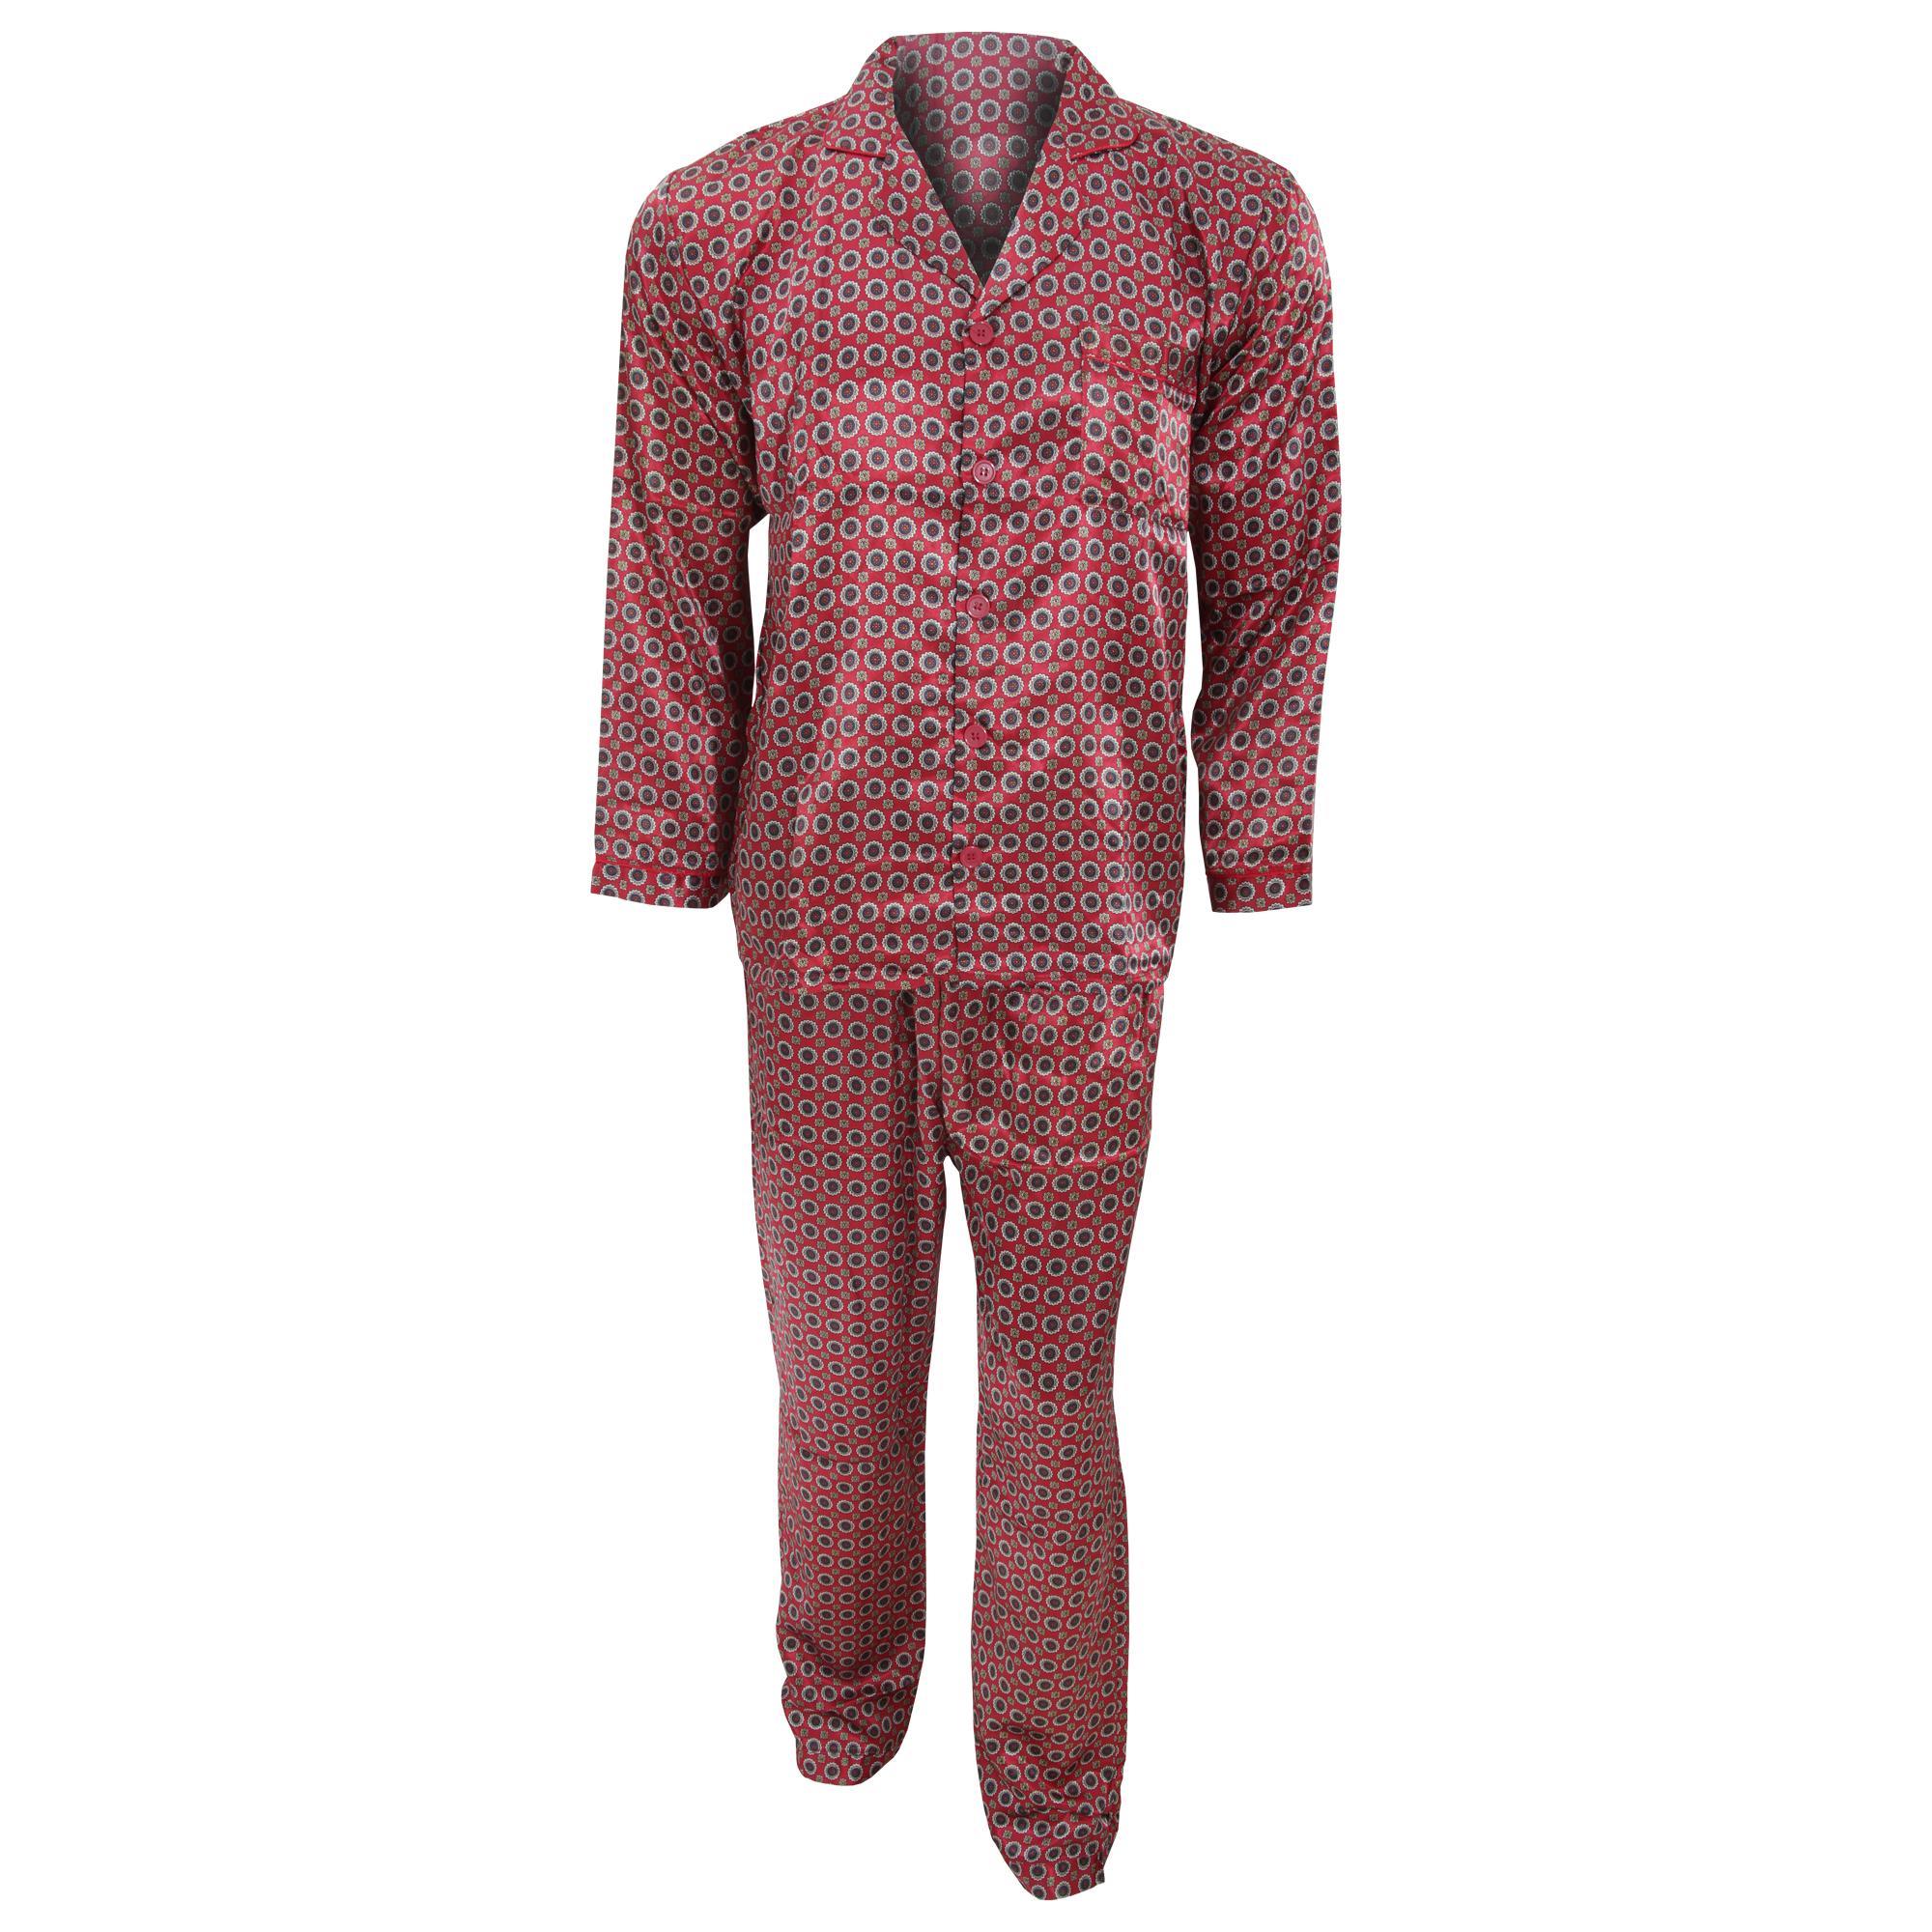 Mens Traditional Patterned Long Sleeve Satin Shirt & Bottoms Pyjamas/Nightwear Set (Red) (M Chest: 40inch)